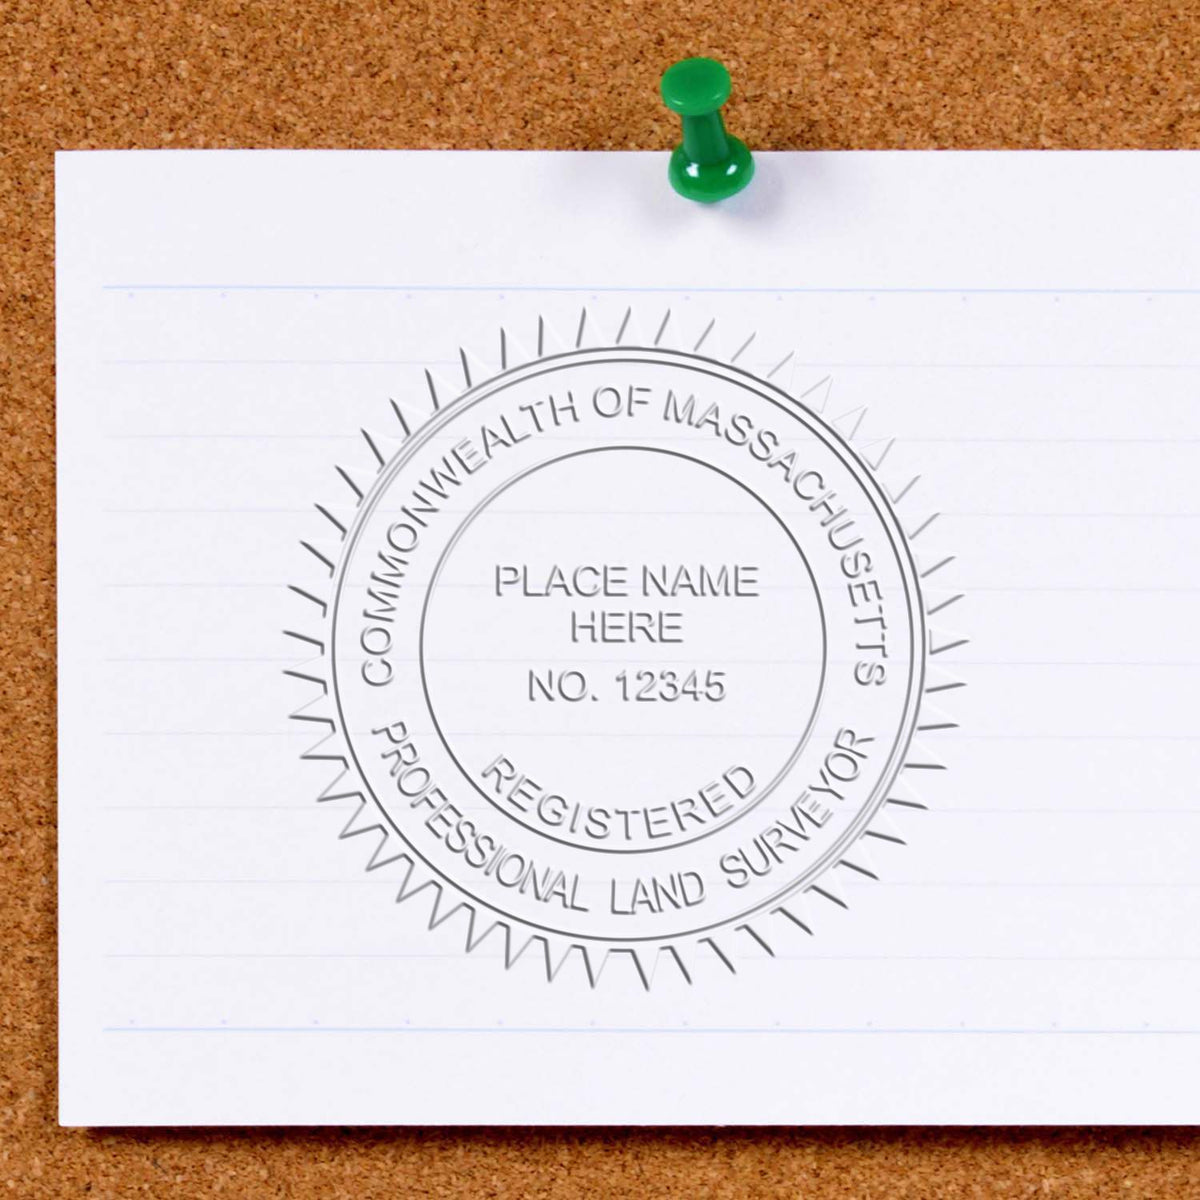 An in use photo of the Gift Massachusetts Land Surveyor Seal showing a sample imprint on a cardstock